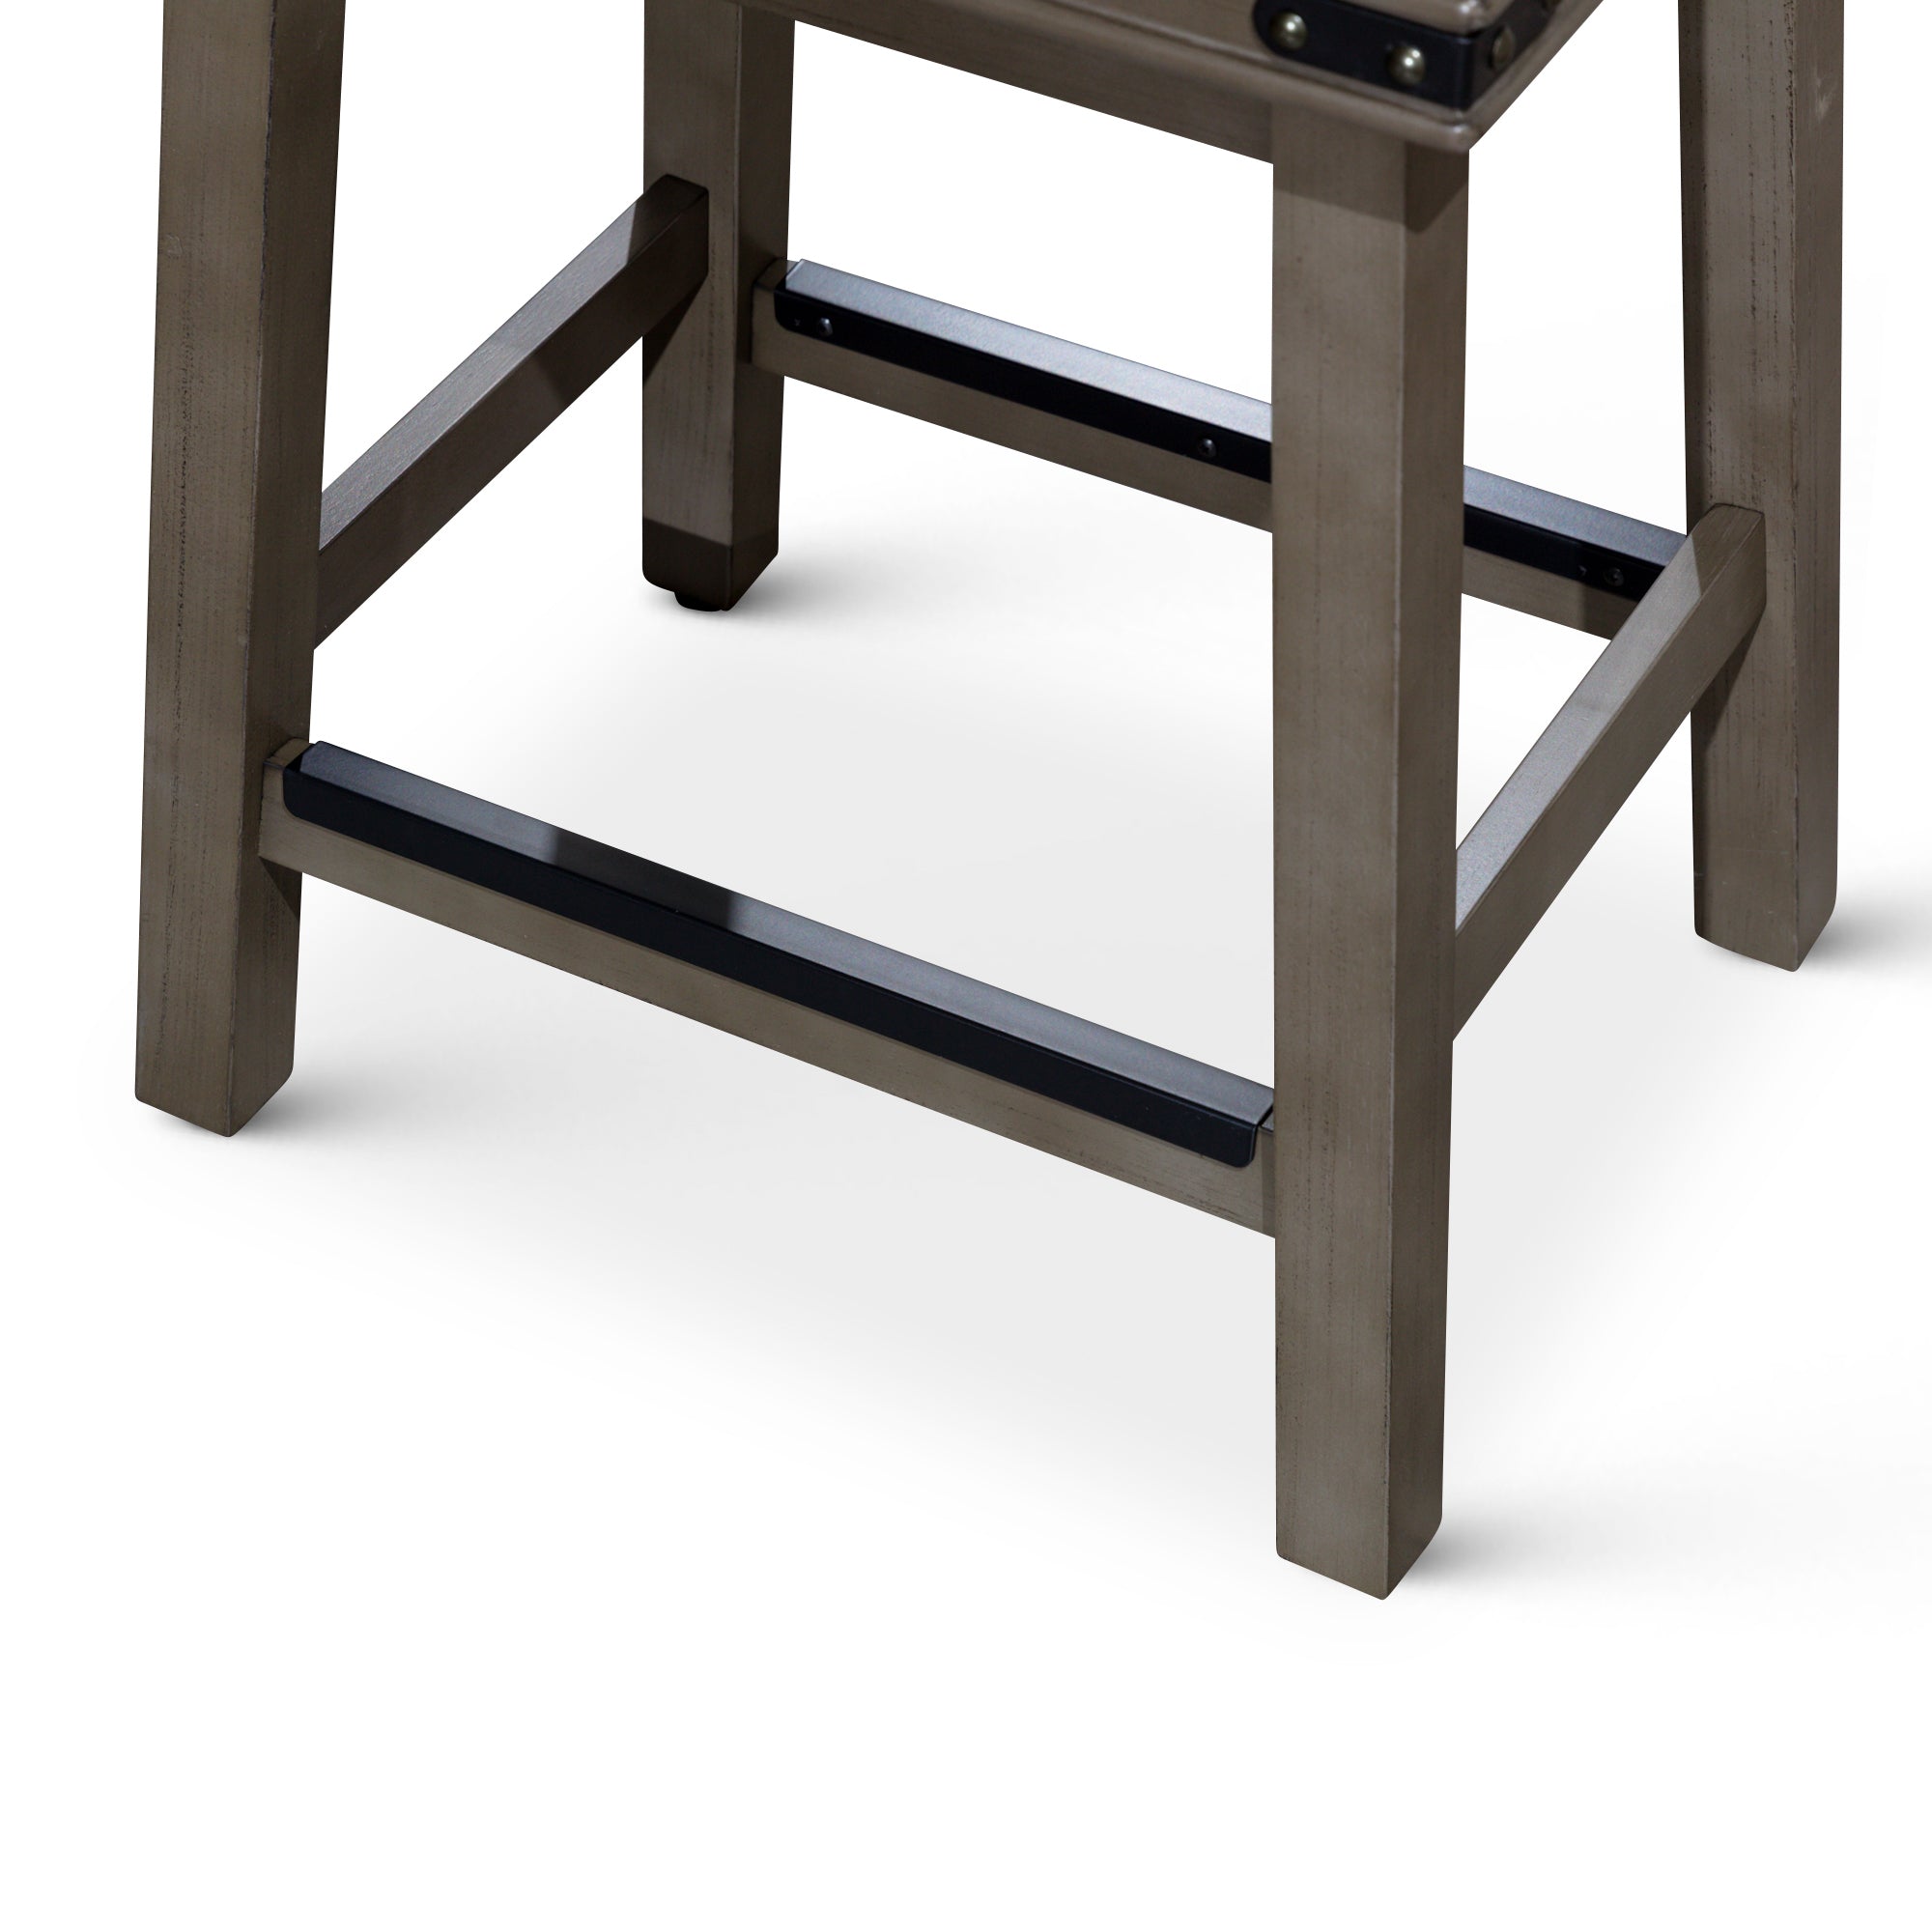 30" Bar Stool, Weathered Gray Finish, French Gray gray-bonded leather